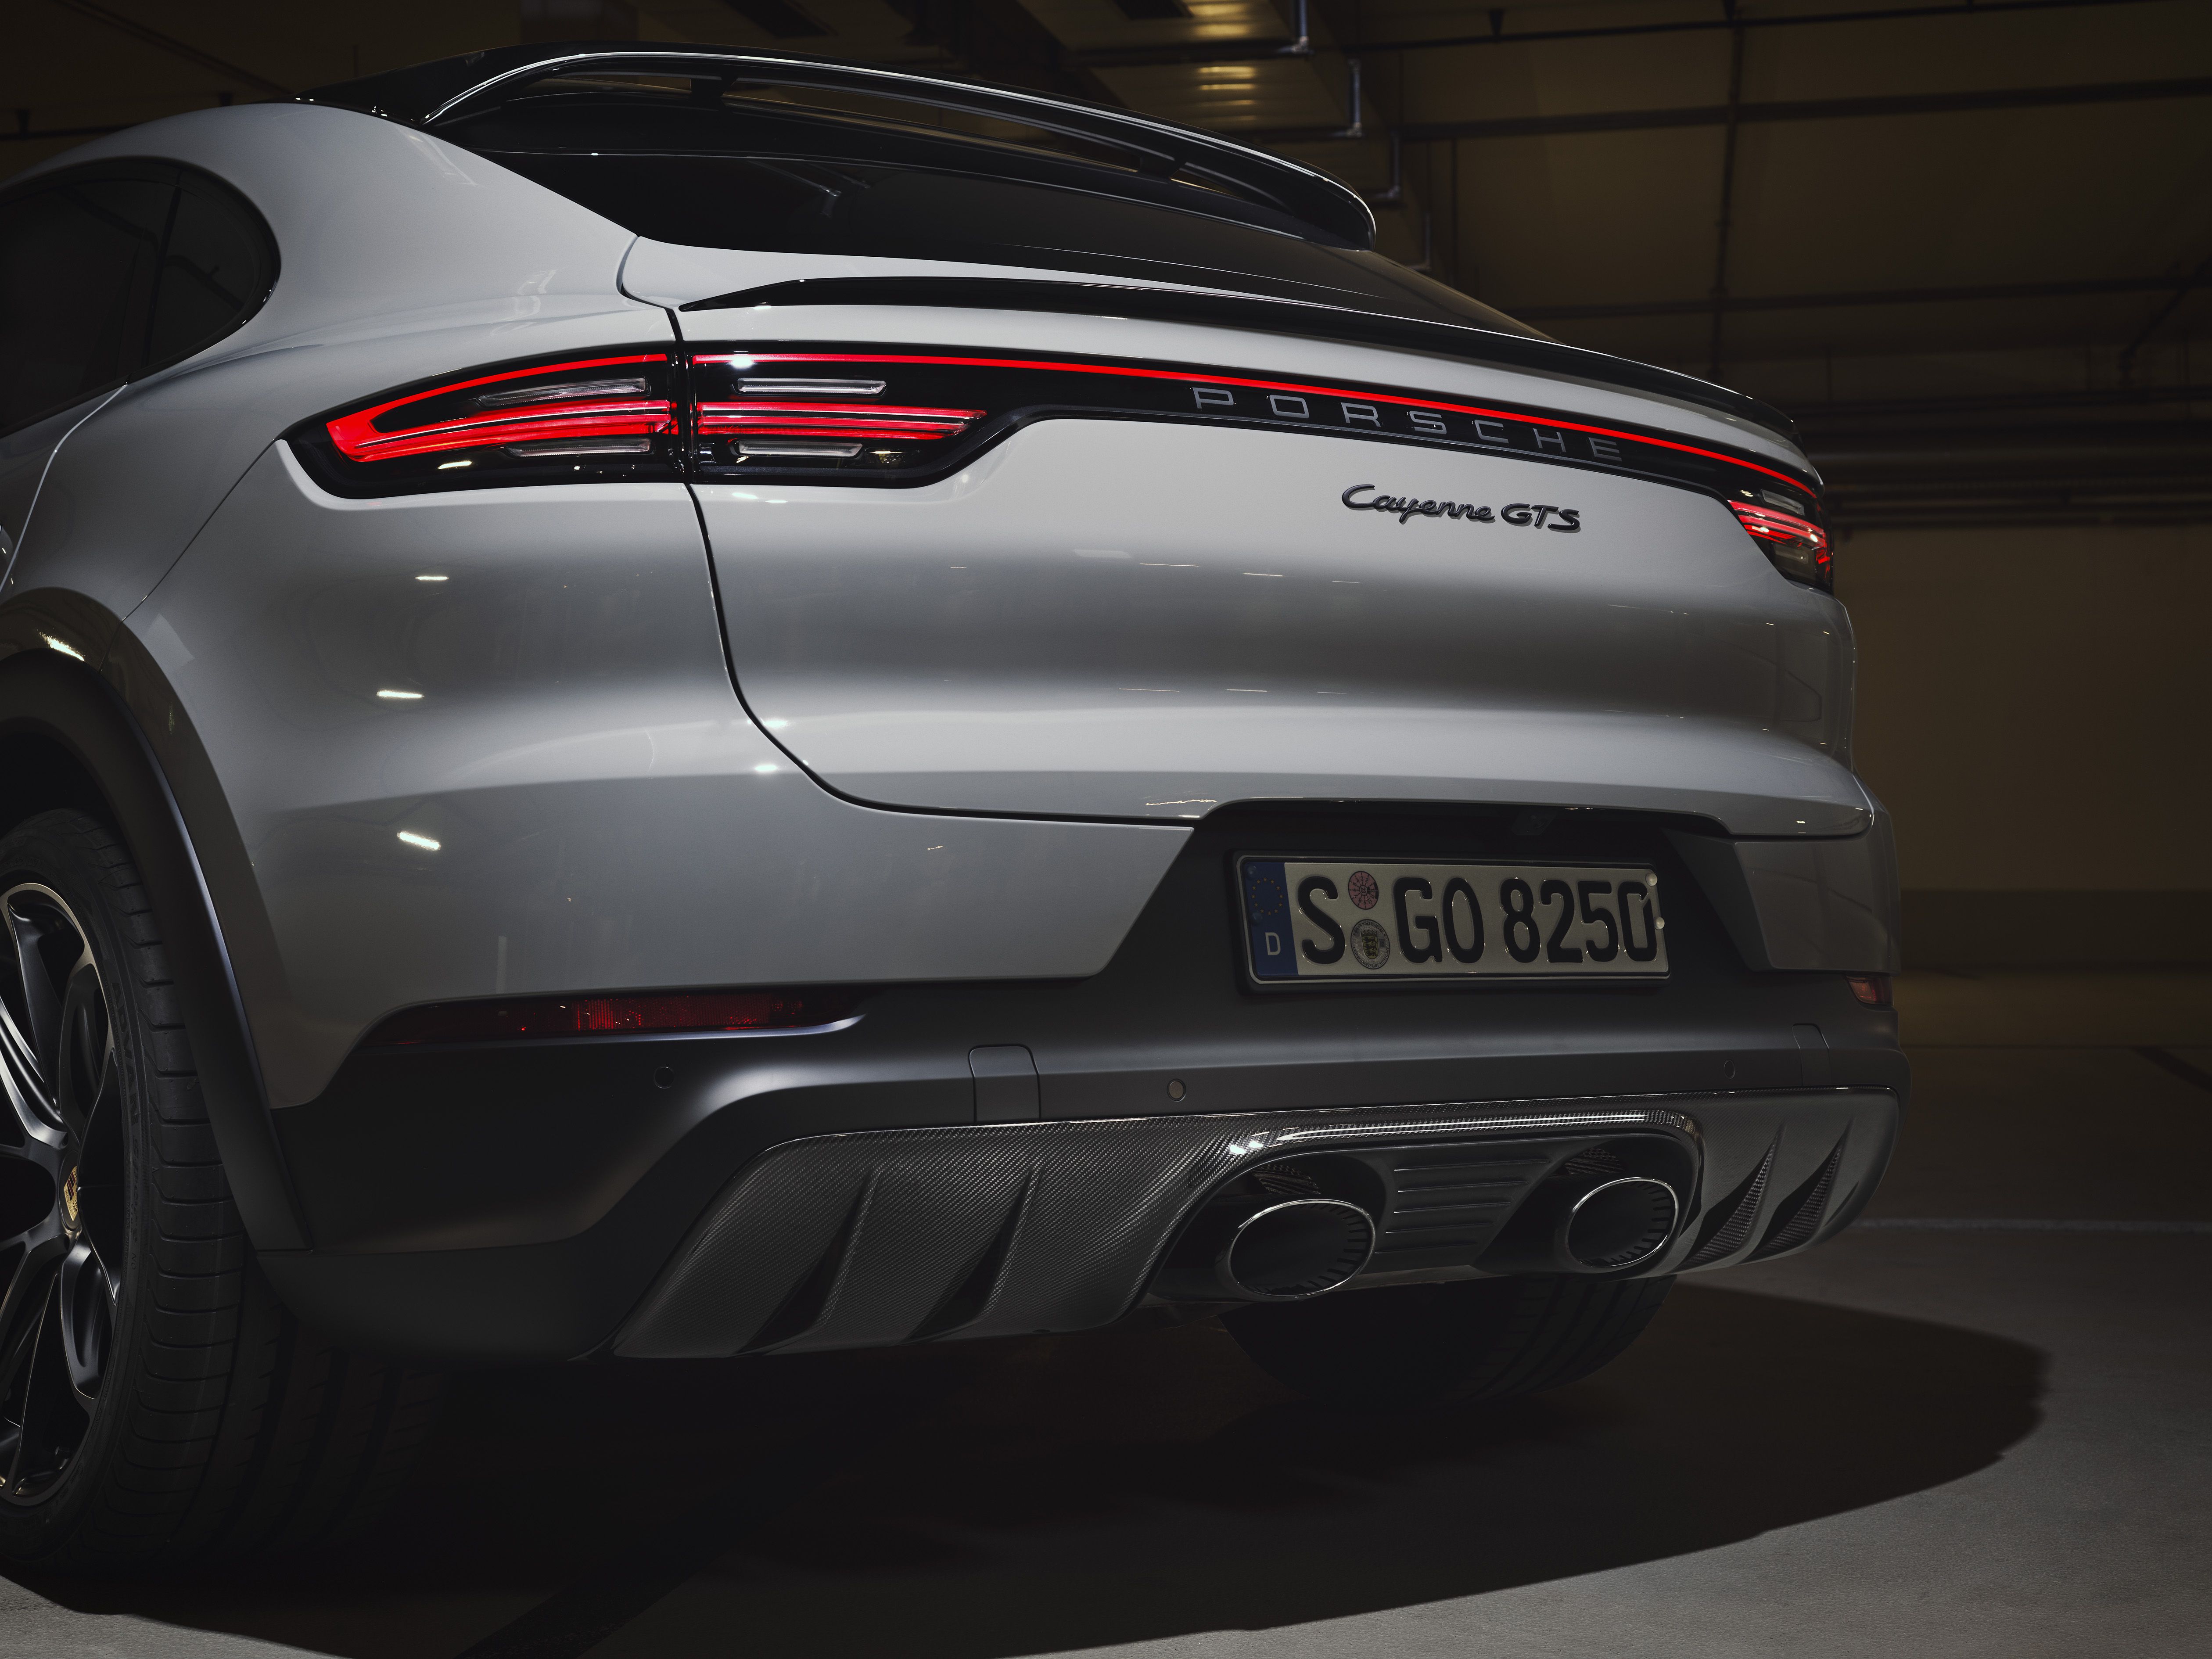 The New 2021 Porsche Cayenne GTS and Cayenne GTS Coupe